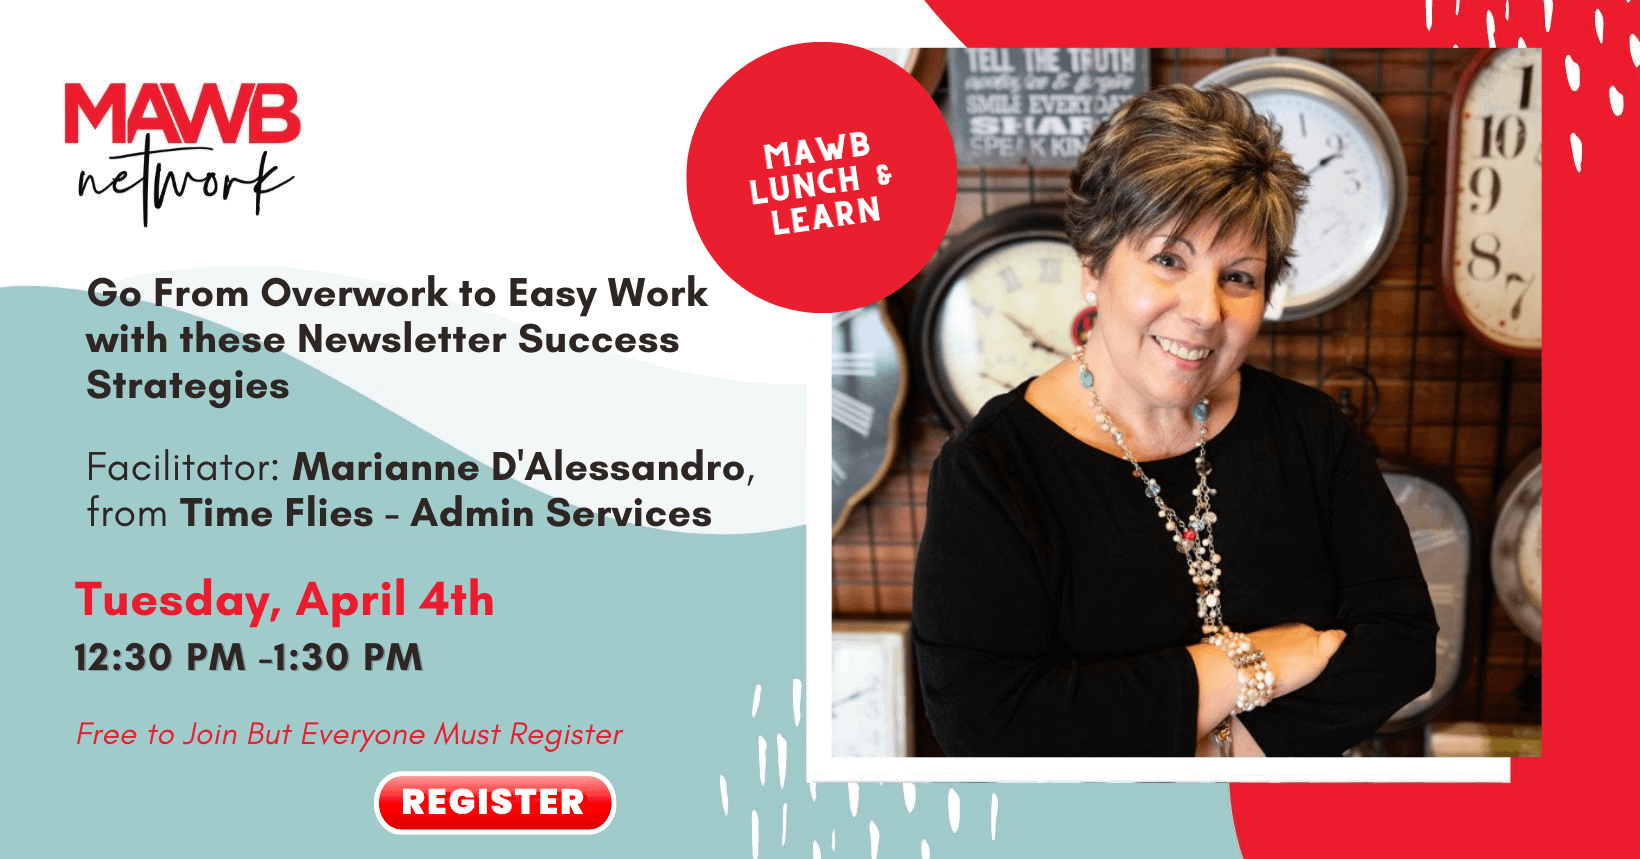 Announcement of the Lunch & Learn session called Go From Overwork to Easy Work with these Newsletter Success Strategies with Marianne D'Alessandro